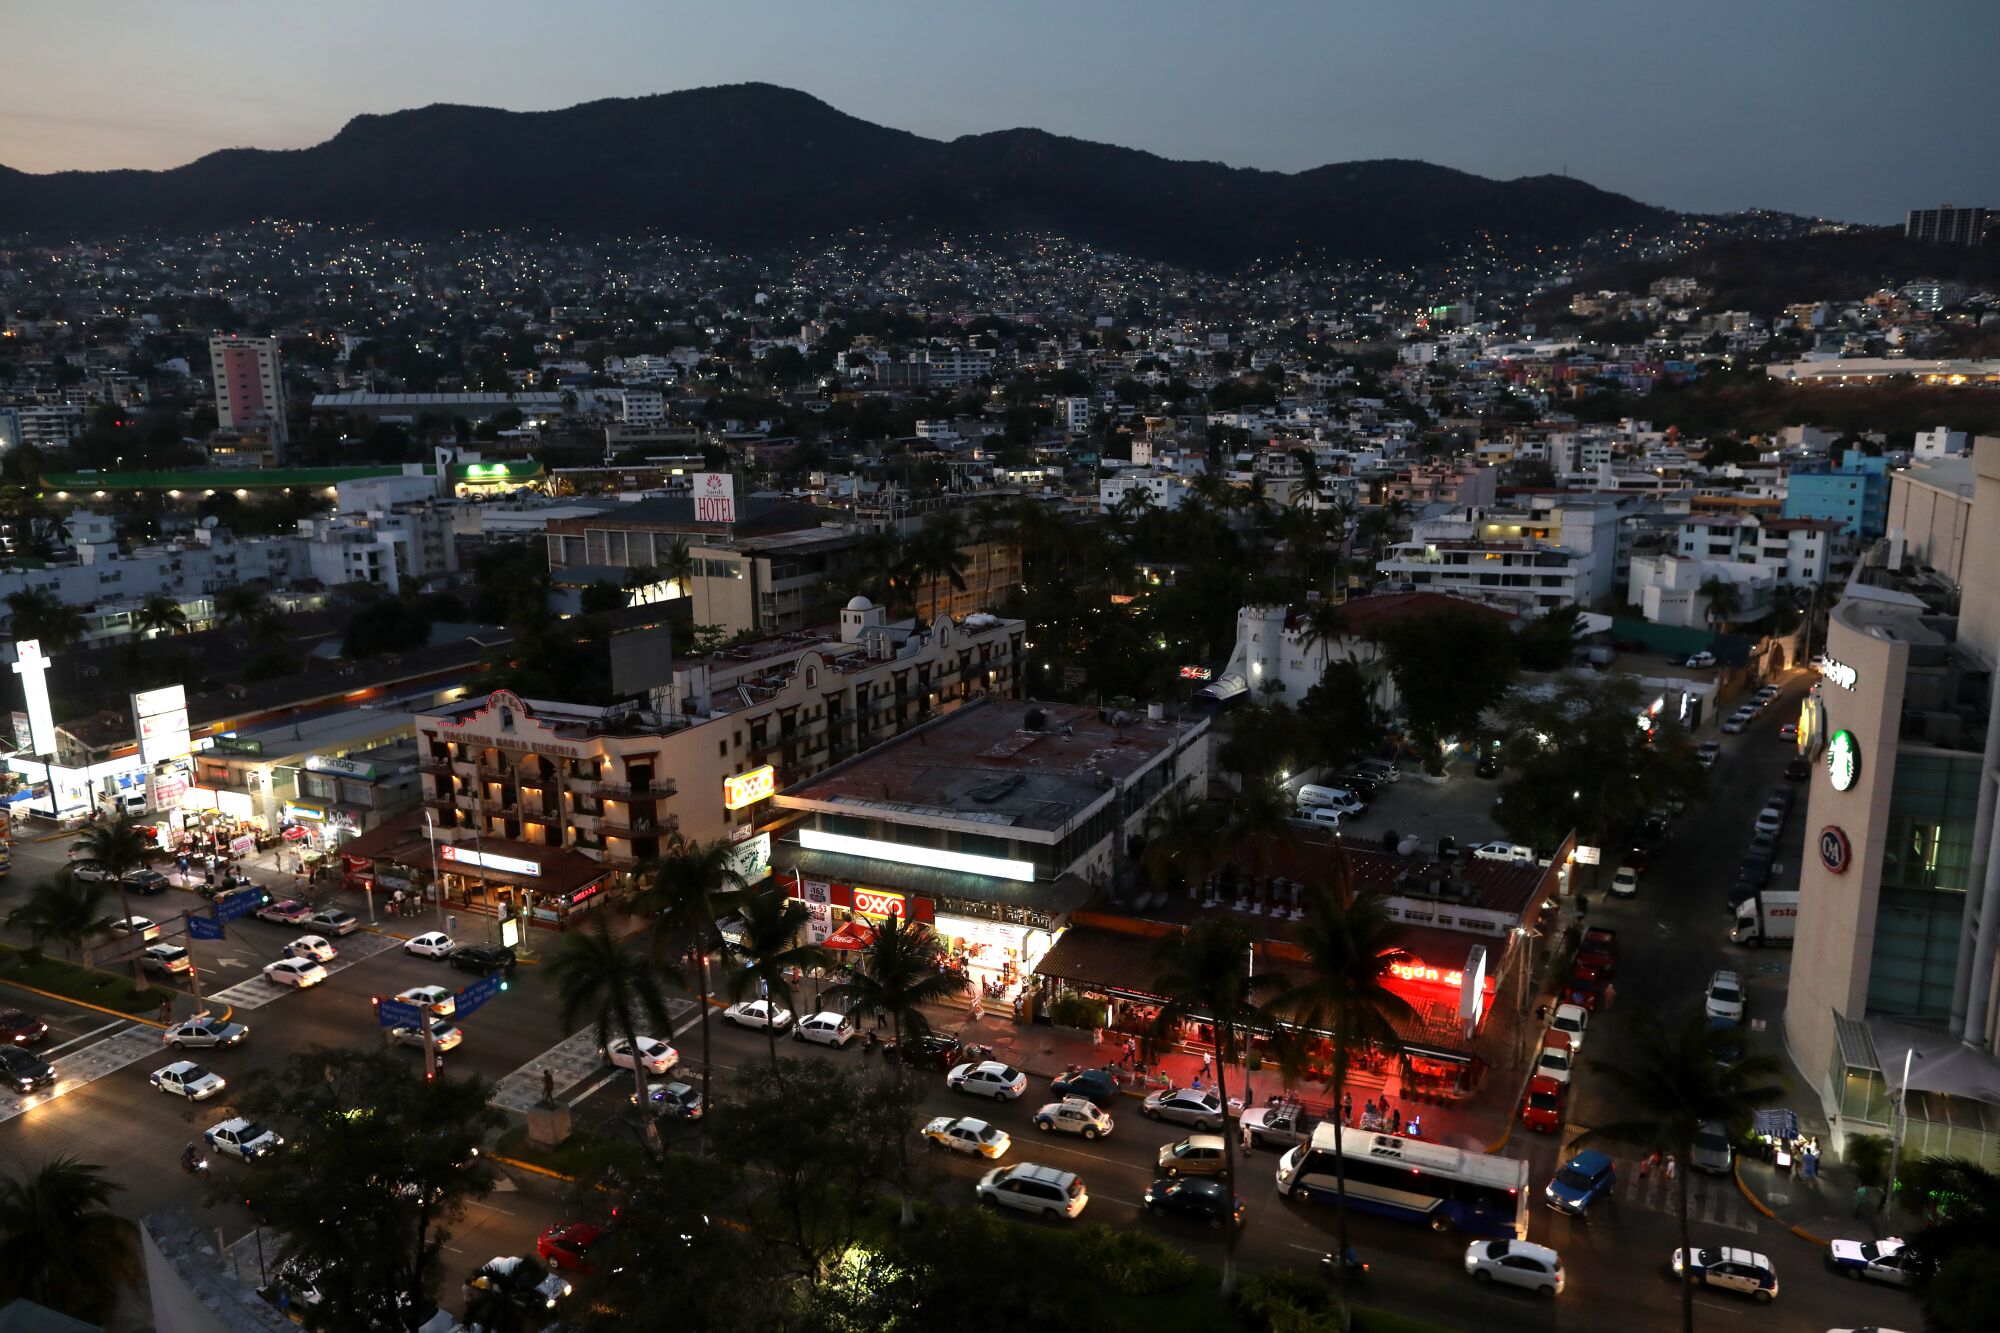 Acapulco is the murder capital of Mexico